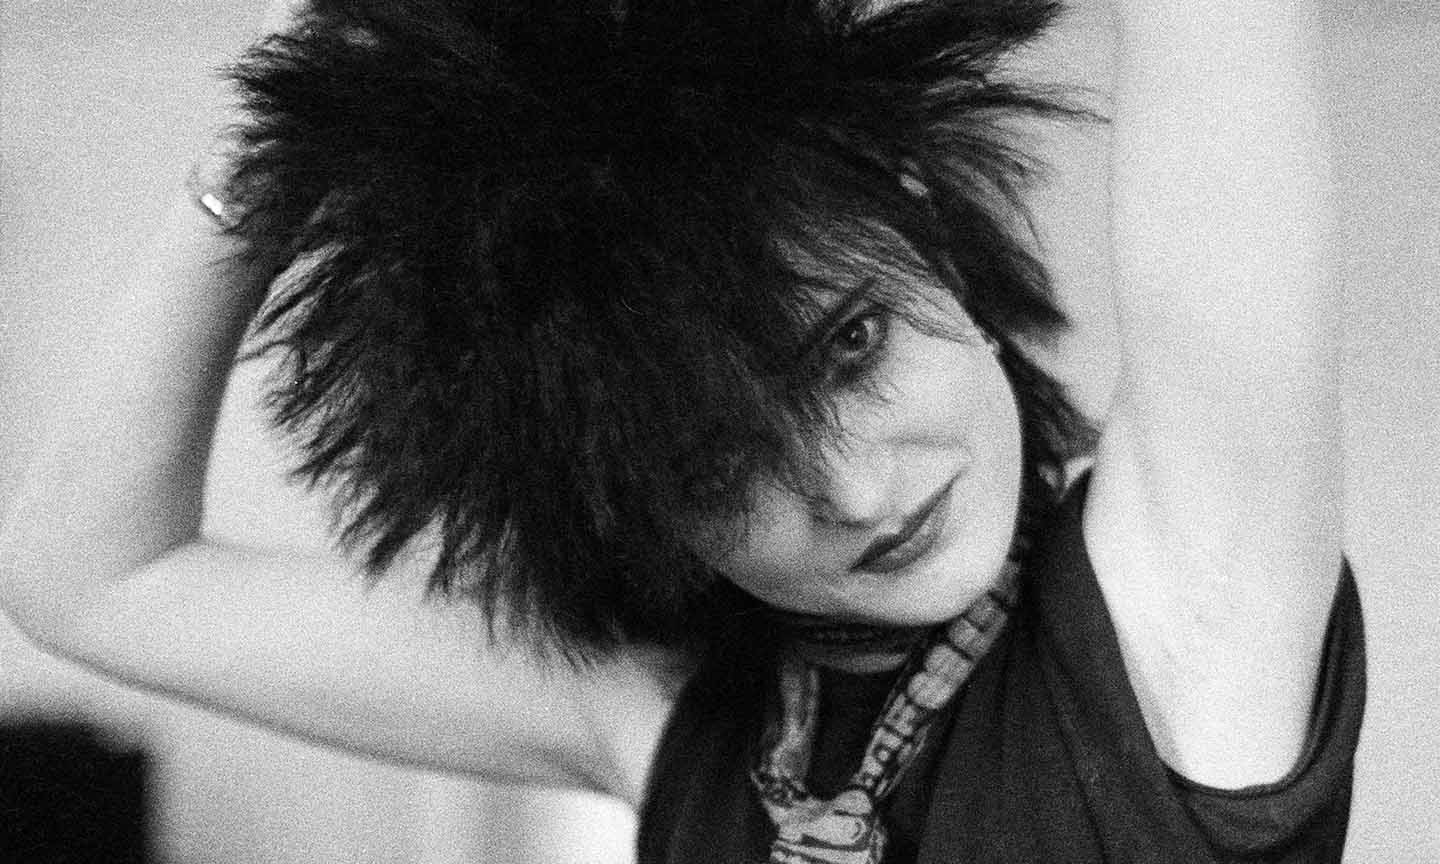 Atypical Girls The Female Punks That Changed The World image